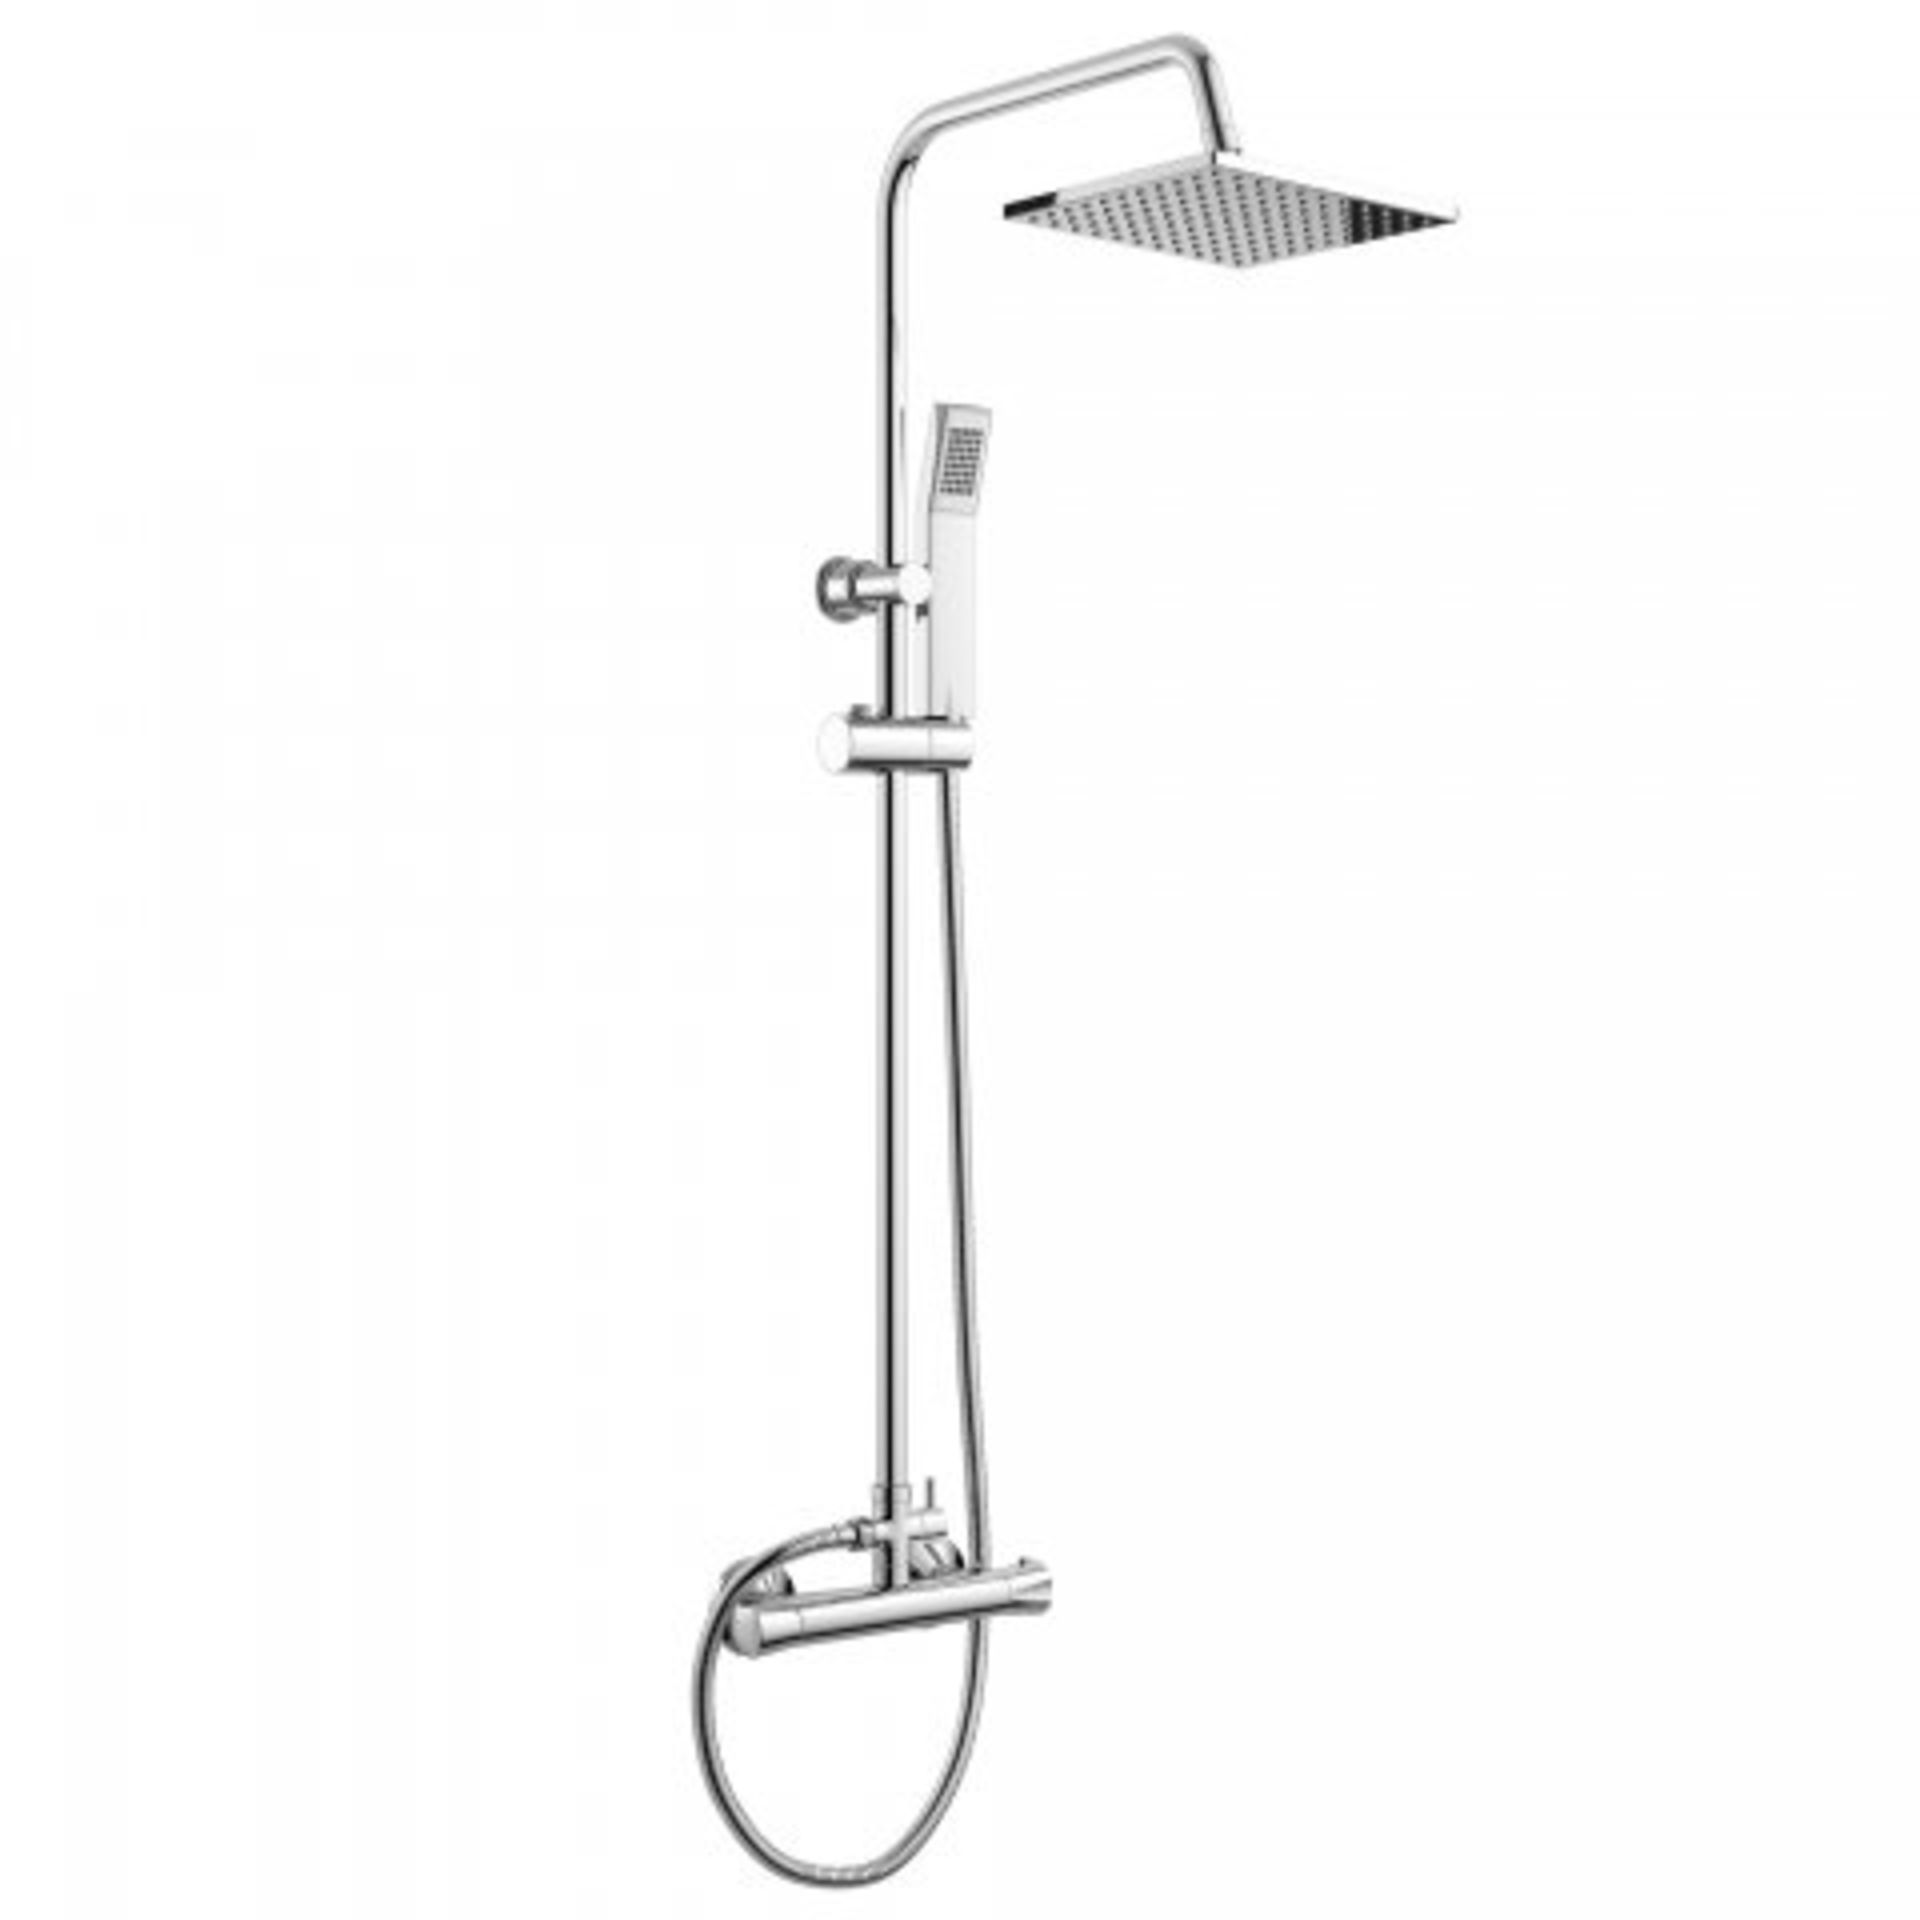 (K36) 200mm Square Head Thermostatic Exposed Shower Kit & Hand Held. RRP £249.99. Simplistic Style - Image 2 of 4